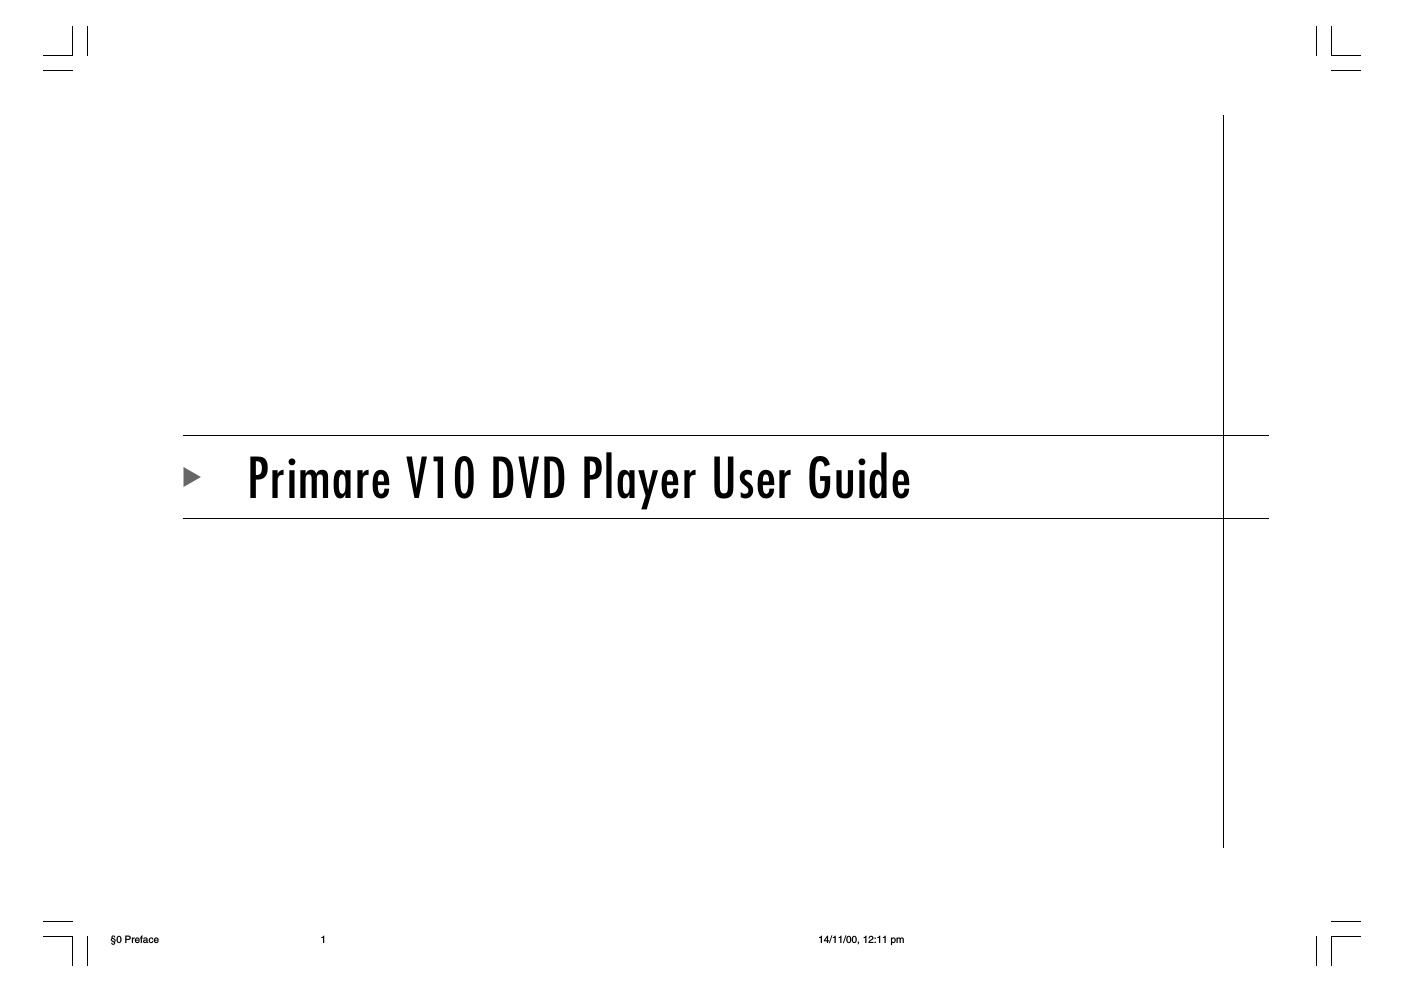 primare v 10 owners manual